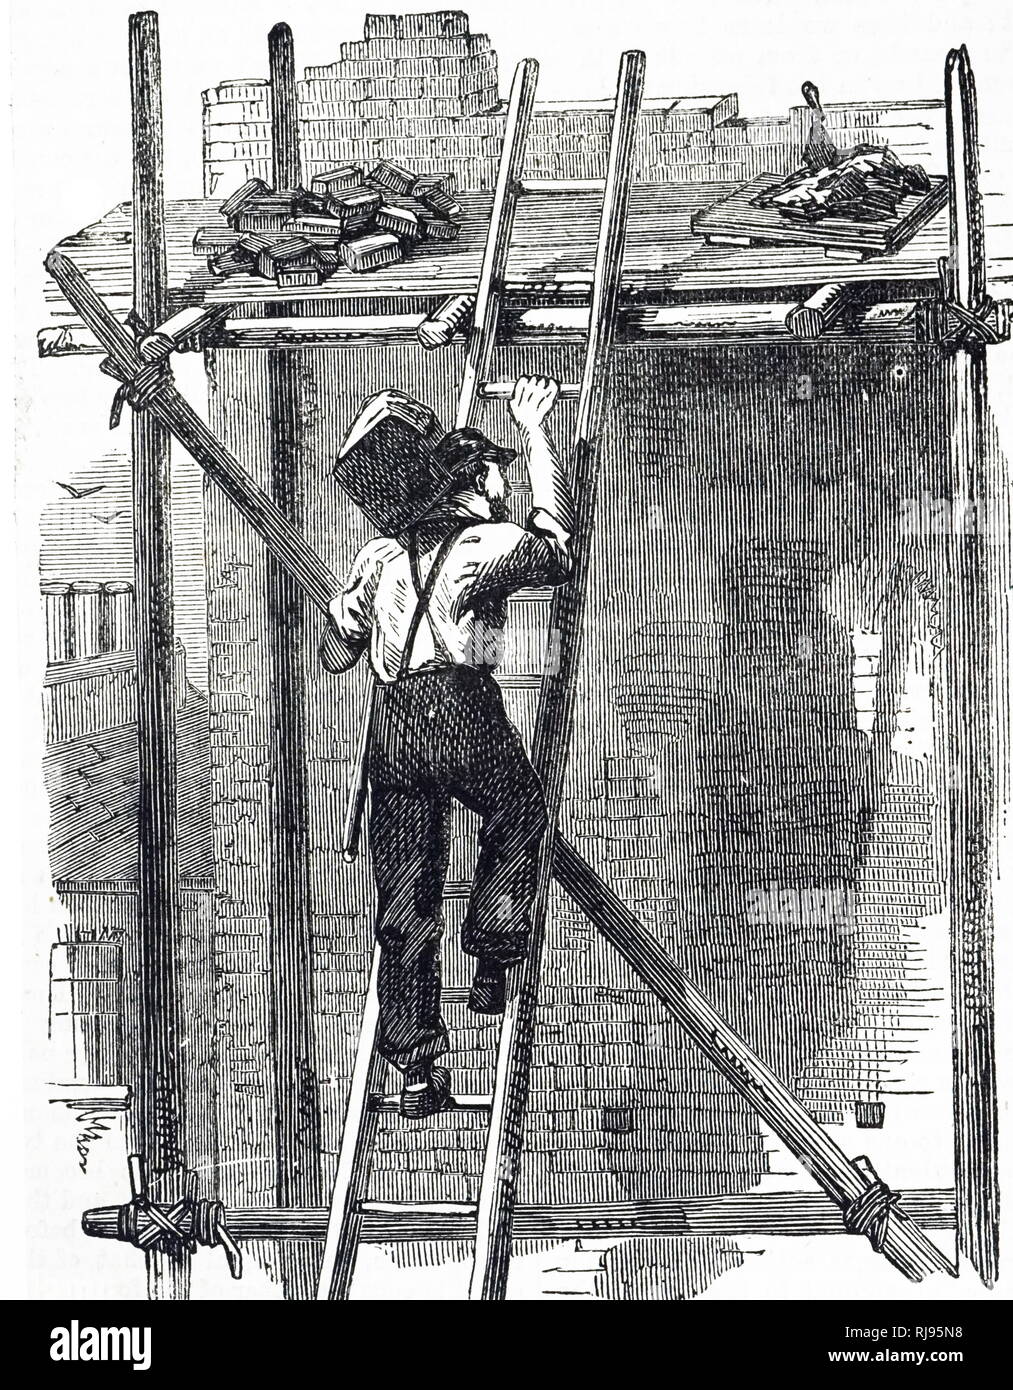 Illustration, showing a bricklayer, with a wooden leg, carrying a Hod loaded with bricks up a ladder to a working platform. 1885 Stock Photo